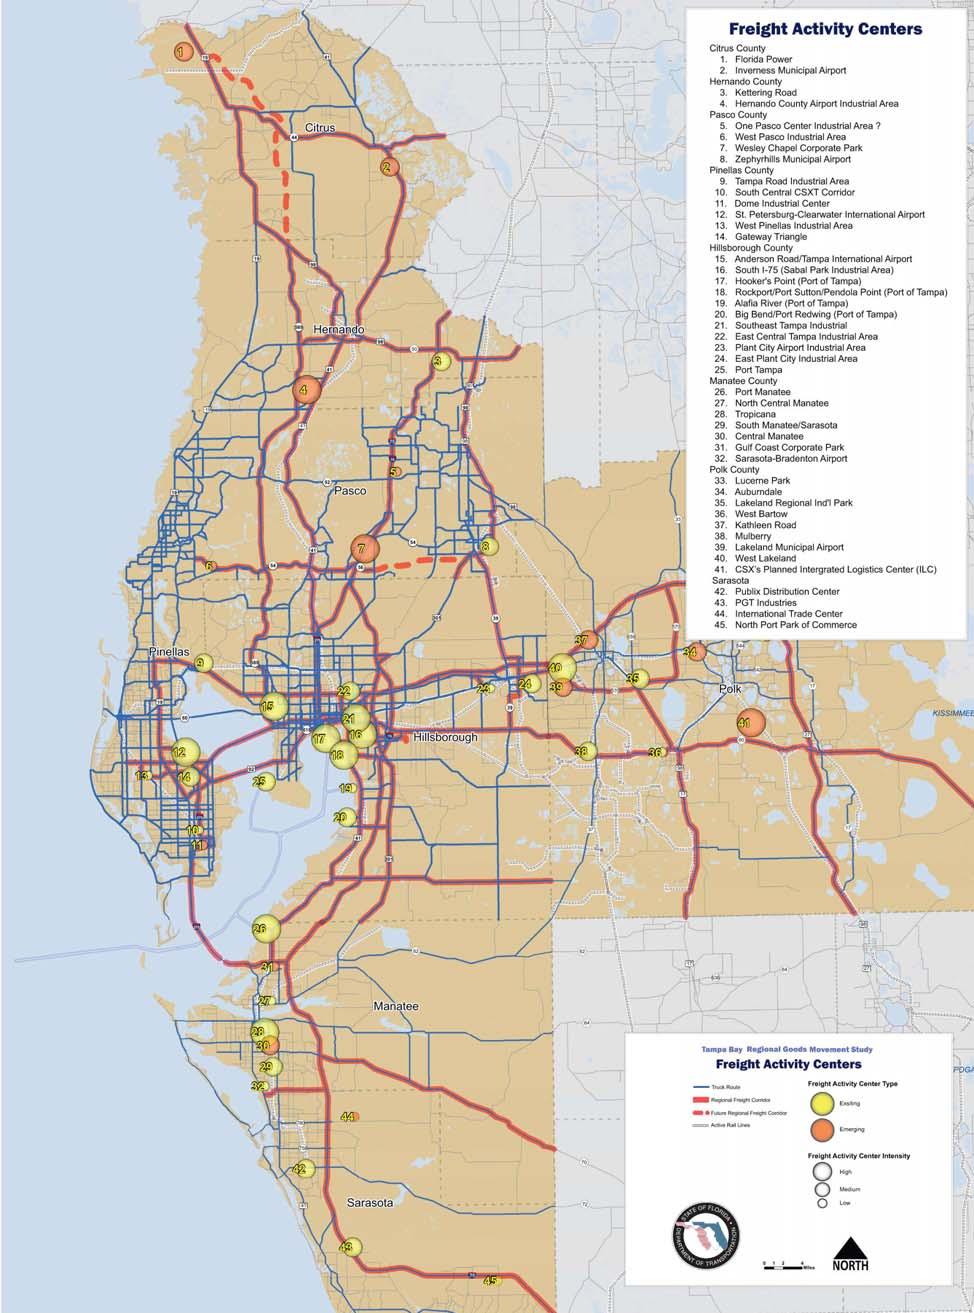 FIGURE 1: FREIGHT ACTIVITY CENTERS IN THE TAMPA BAY